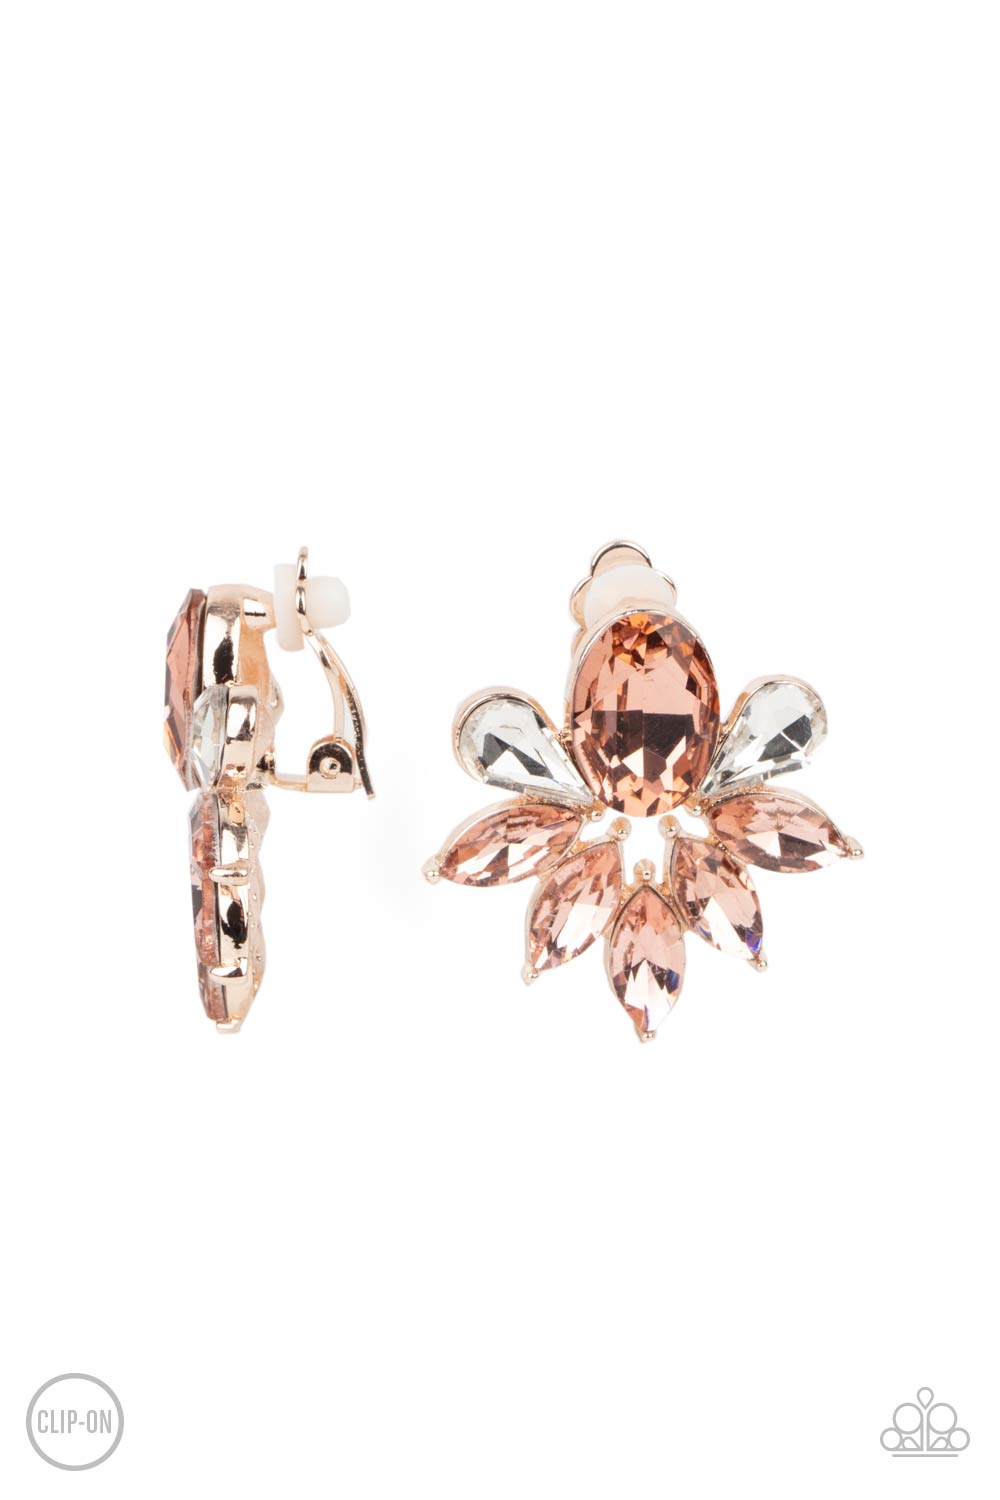 Fearless Finesse - rose gold - Paparazzi CLIP ON earrings